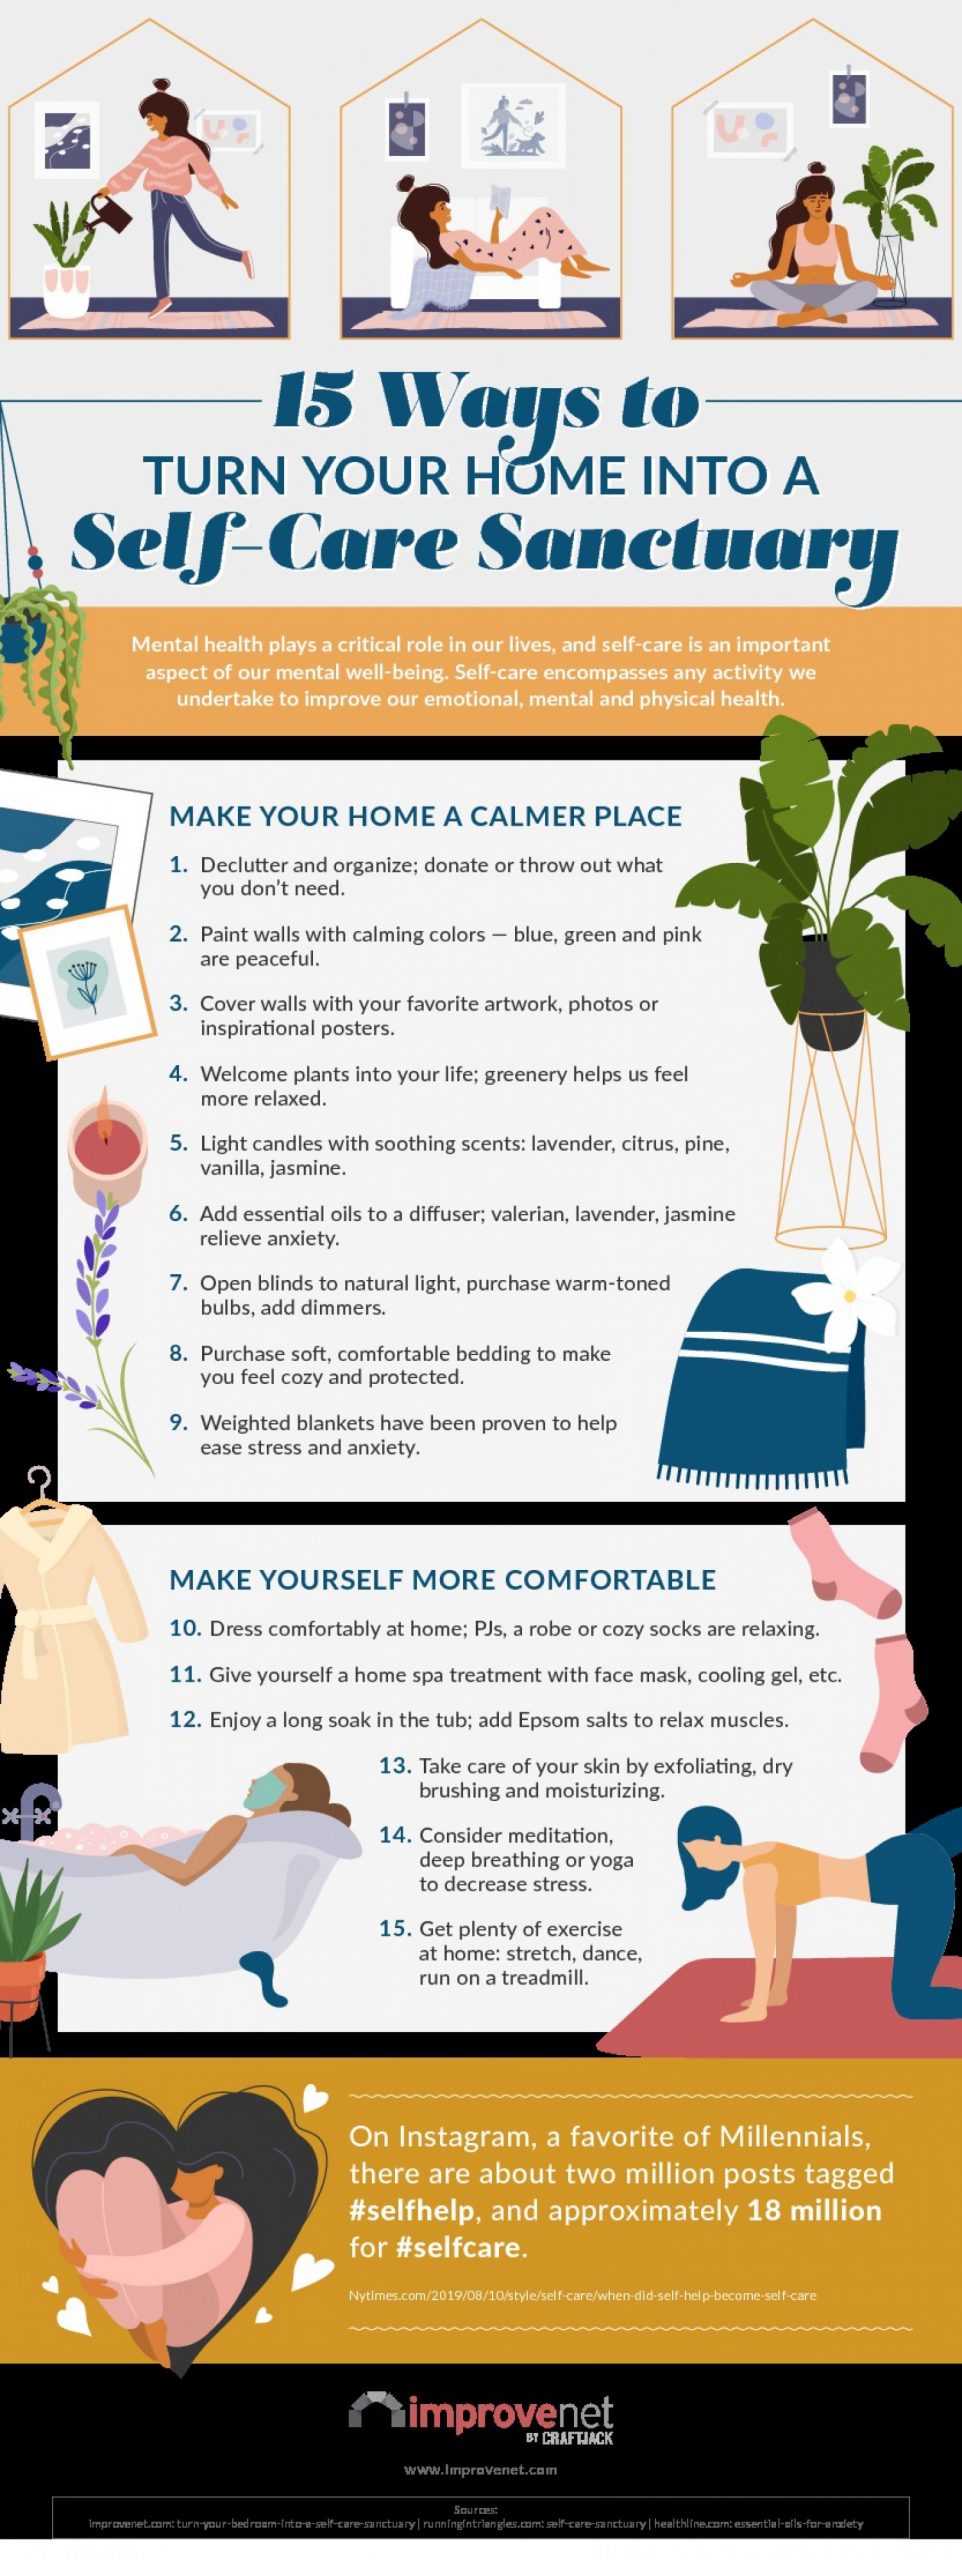 Practicing Self-Care at Home [Infographic]